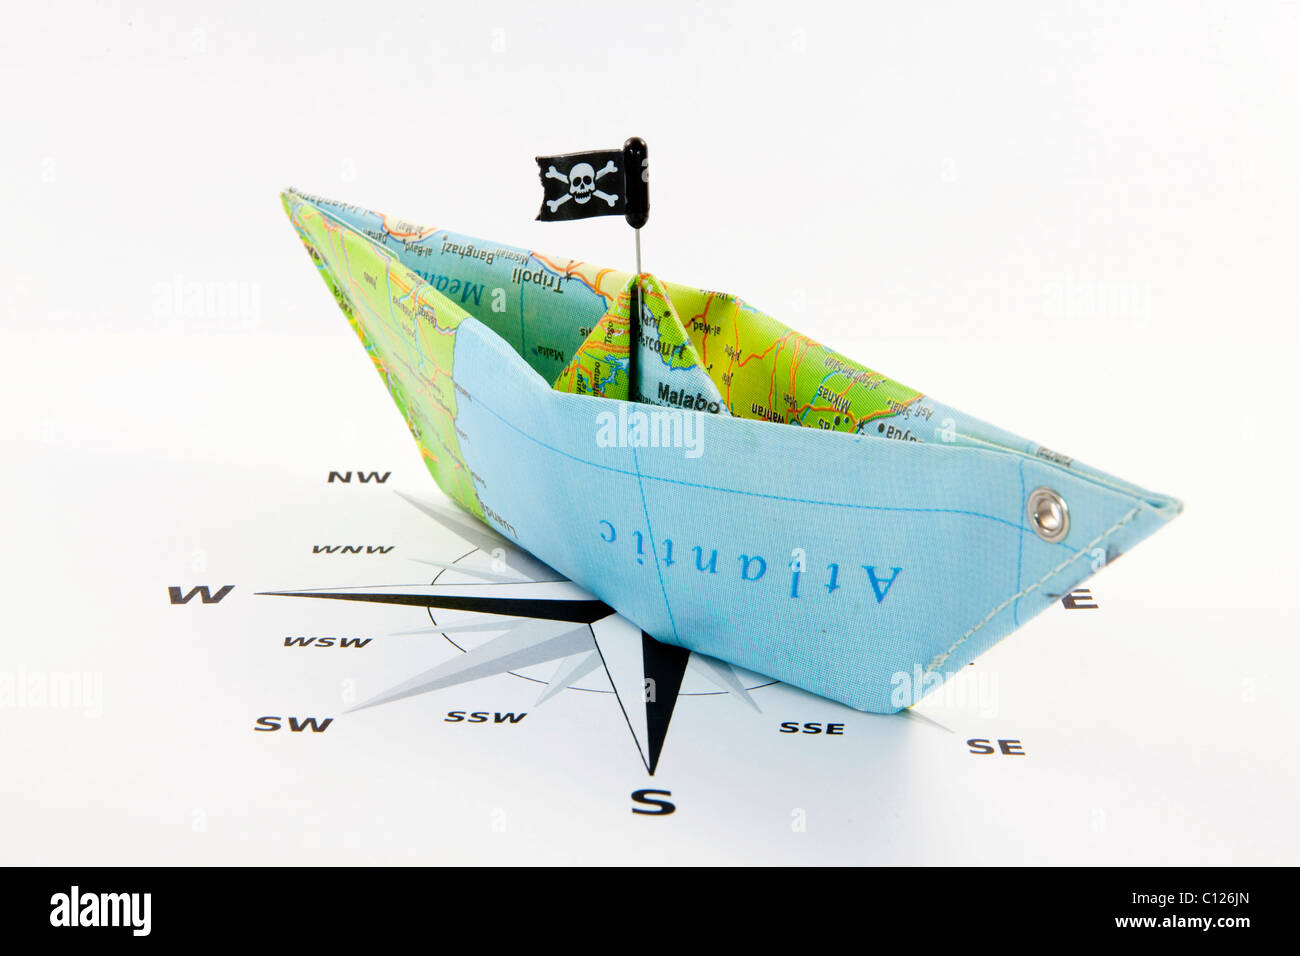 Pirate ship made of paper with a compass rose Stock Photo - Alamy